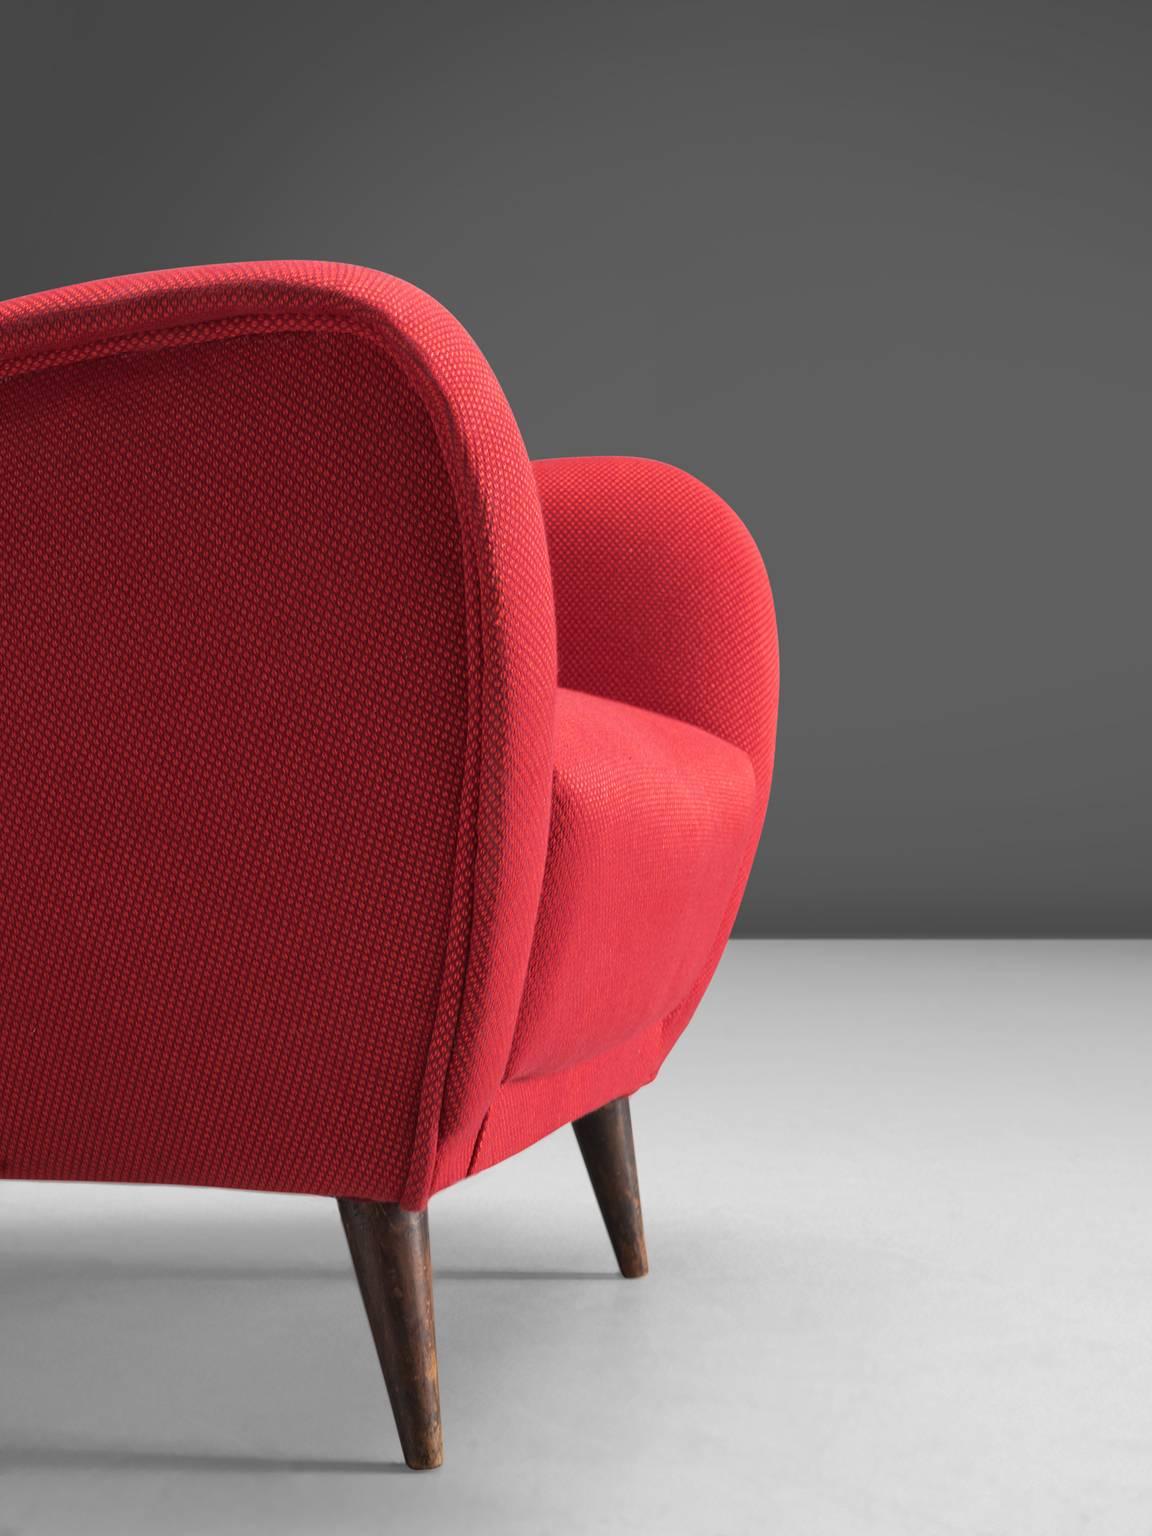 Mid-20th Century Italian Pair of Wingback Chairs in Red Upholstery